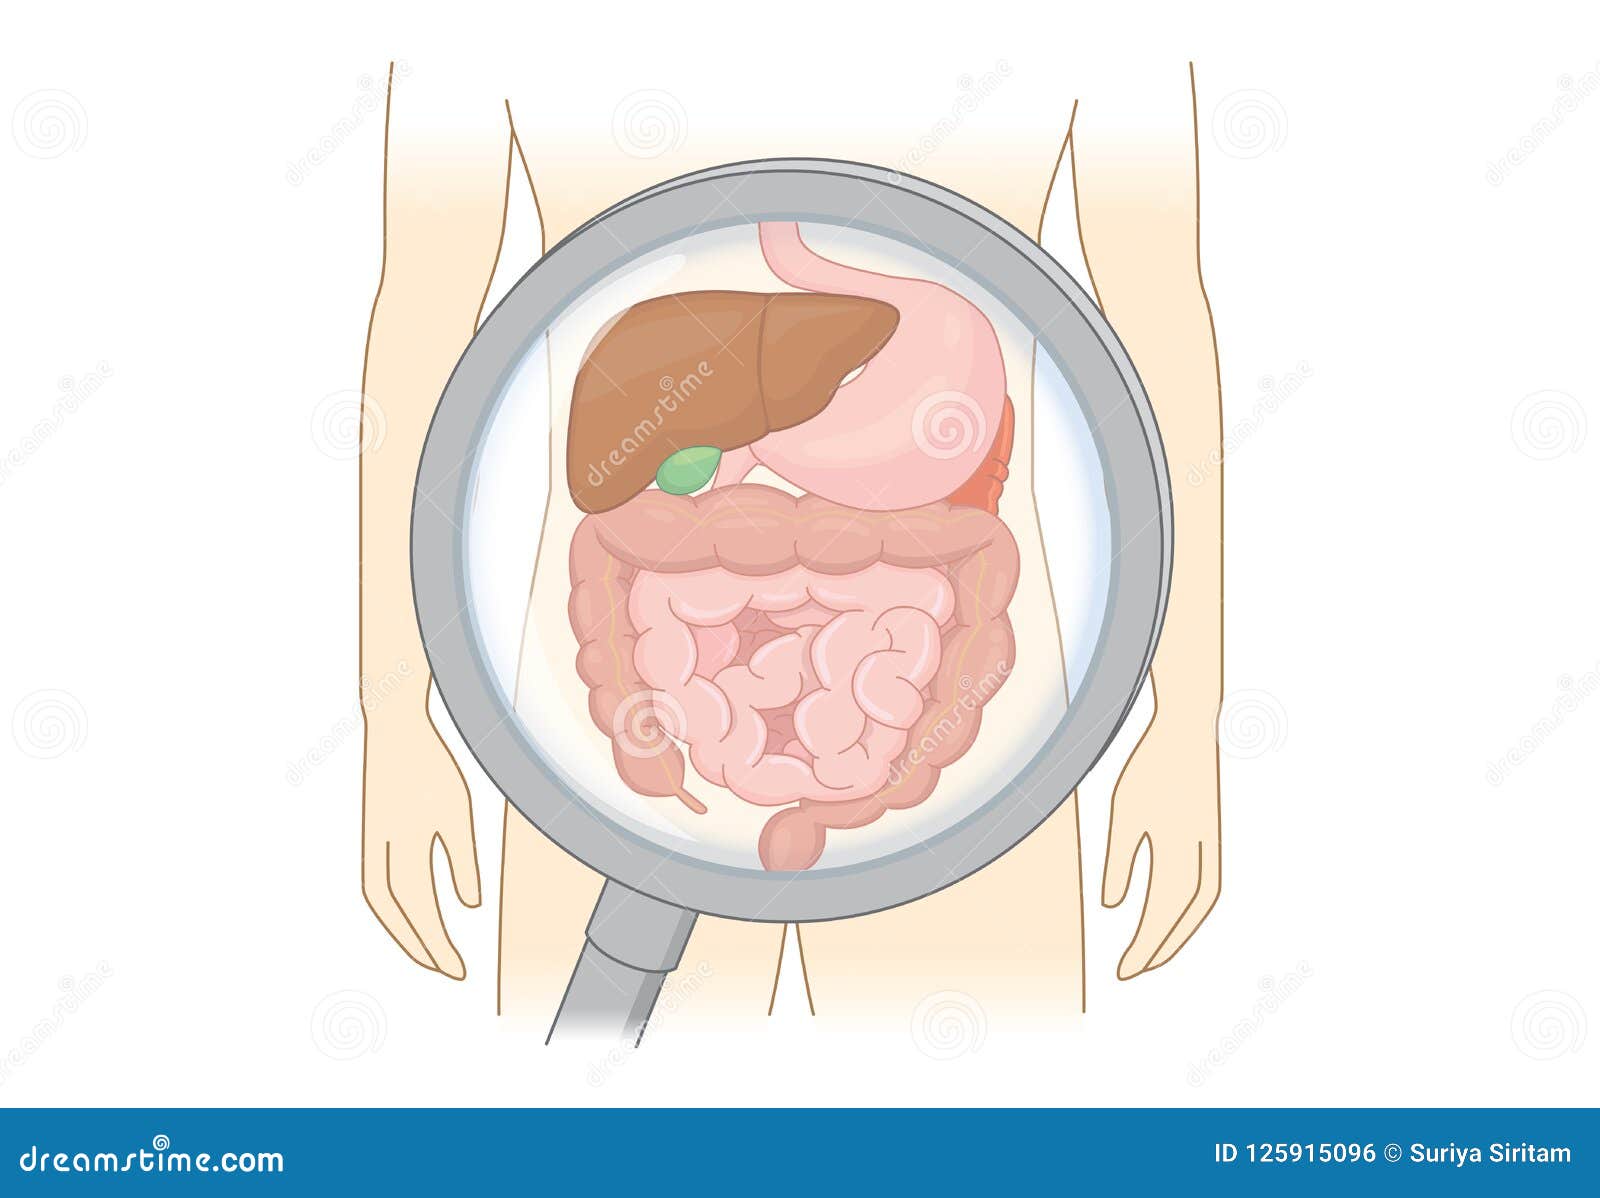 diagnose human digestive system with magnifying glass.